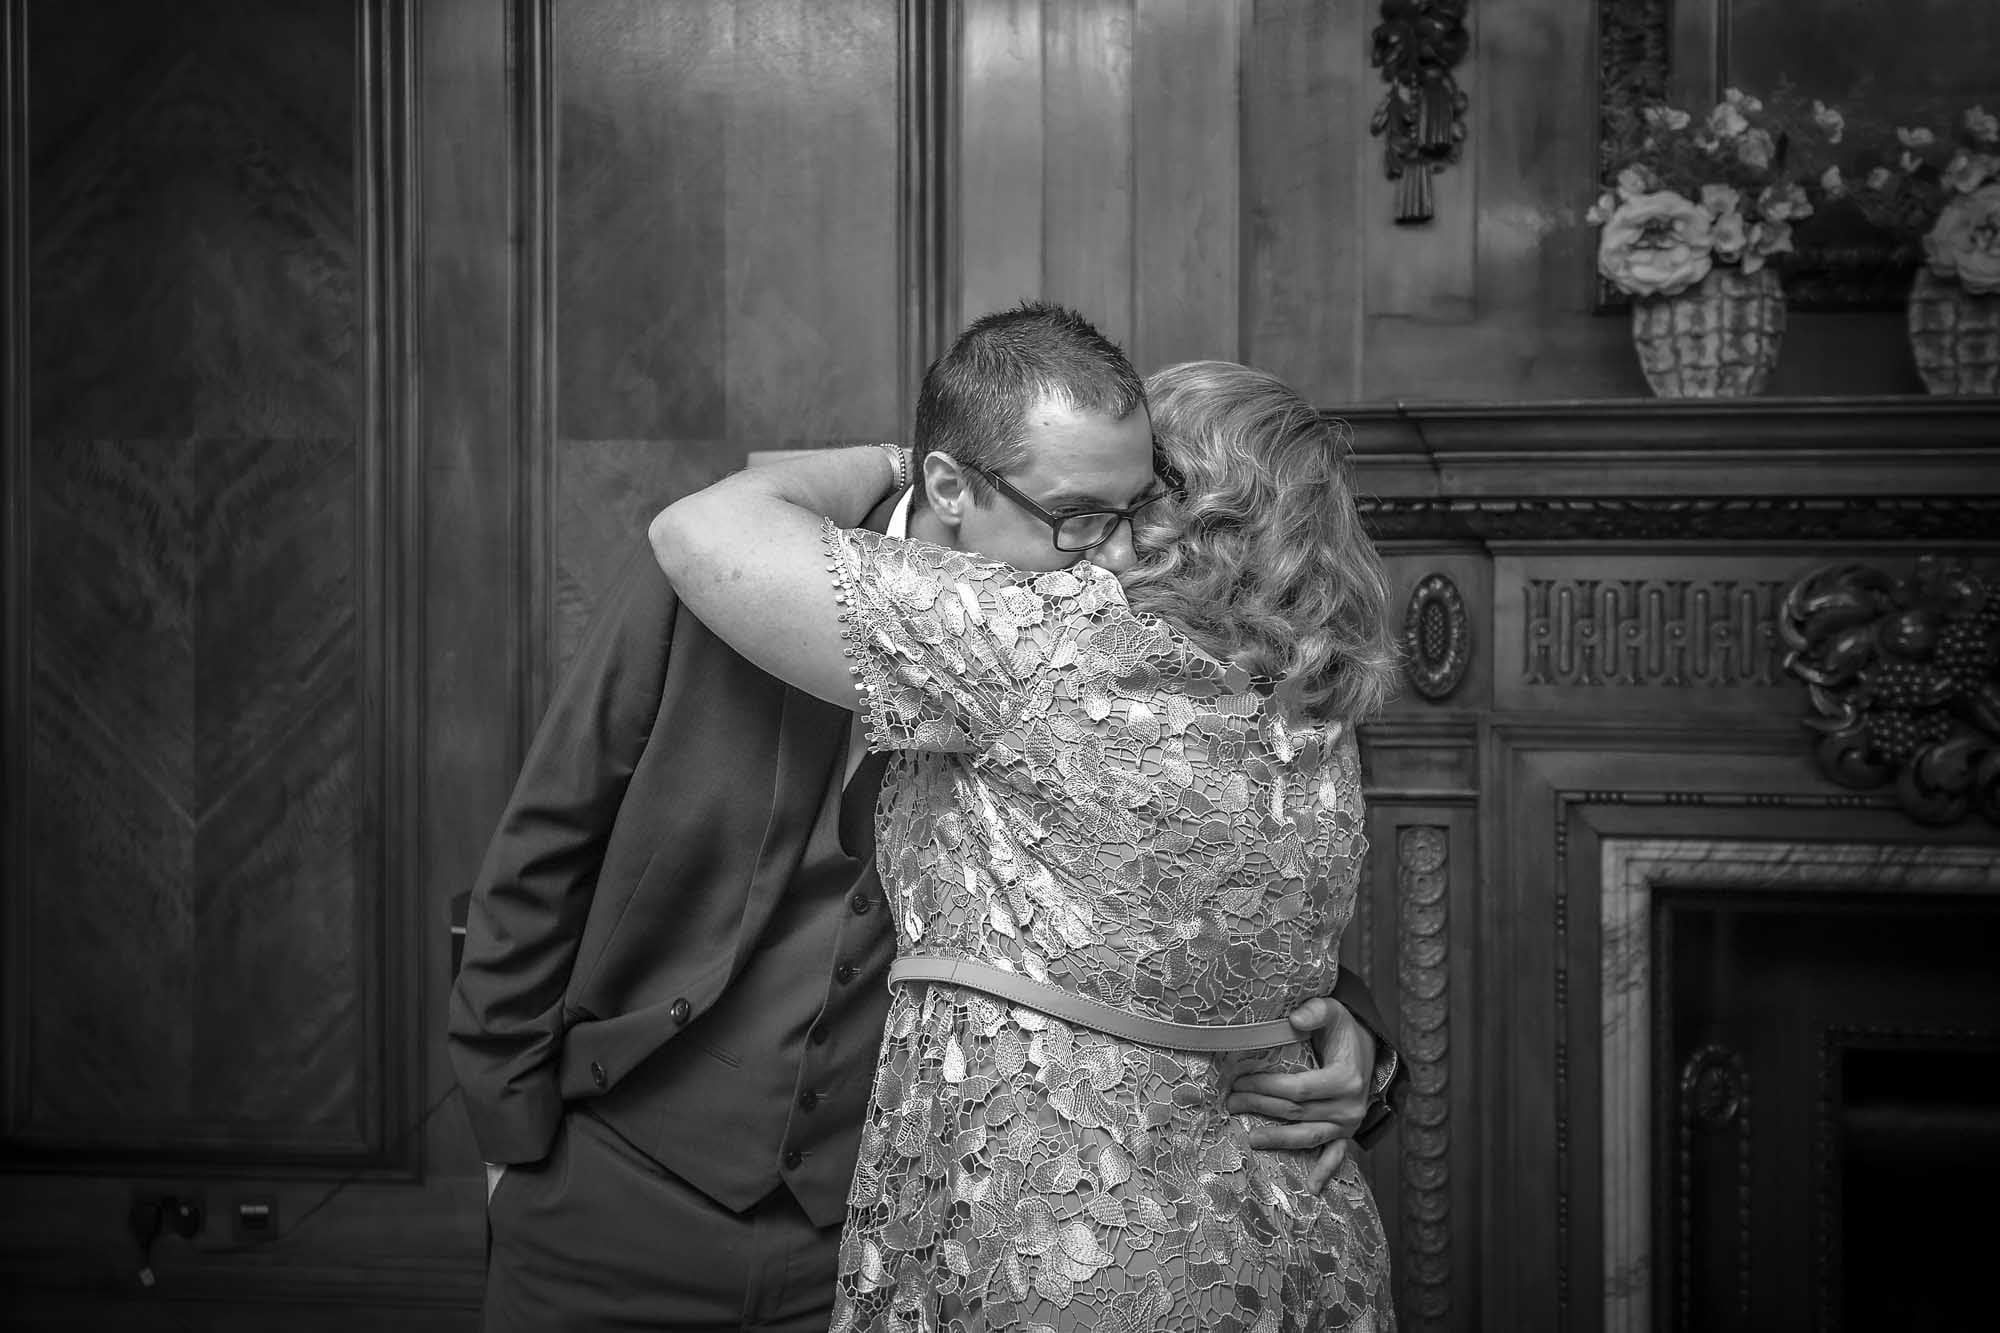 The groom's mother gives him a last minute hug before his wedding ceremony